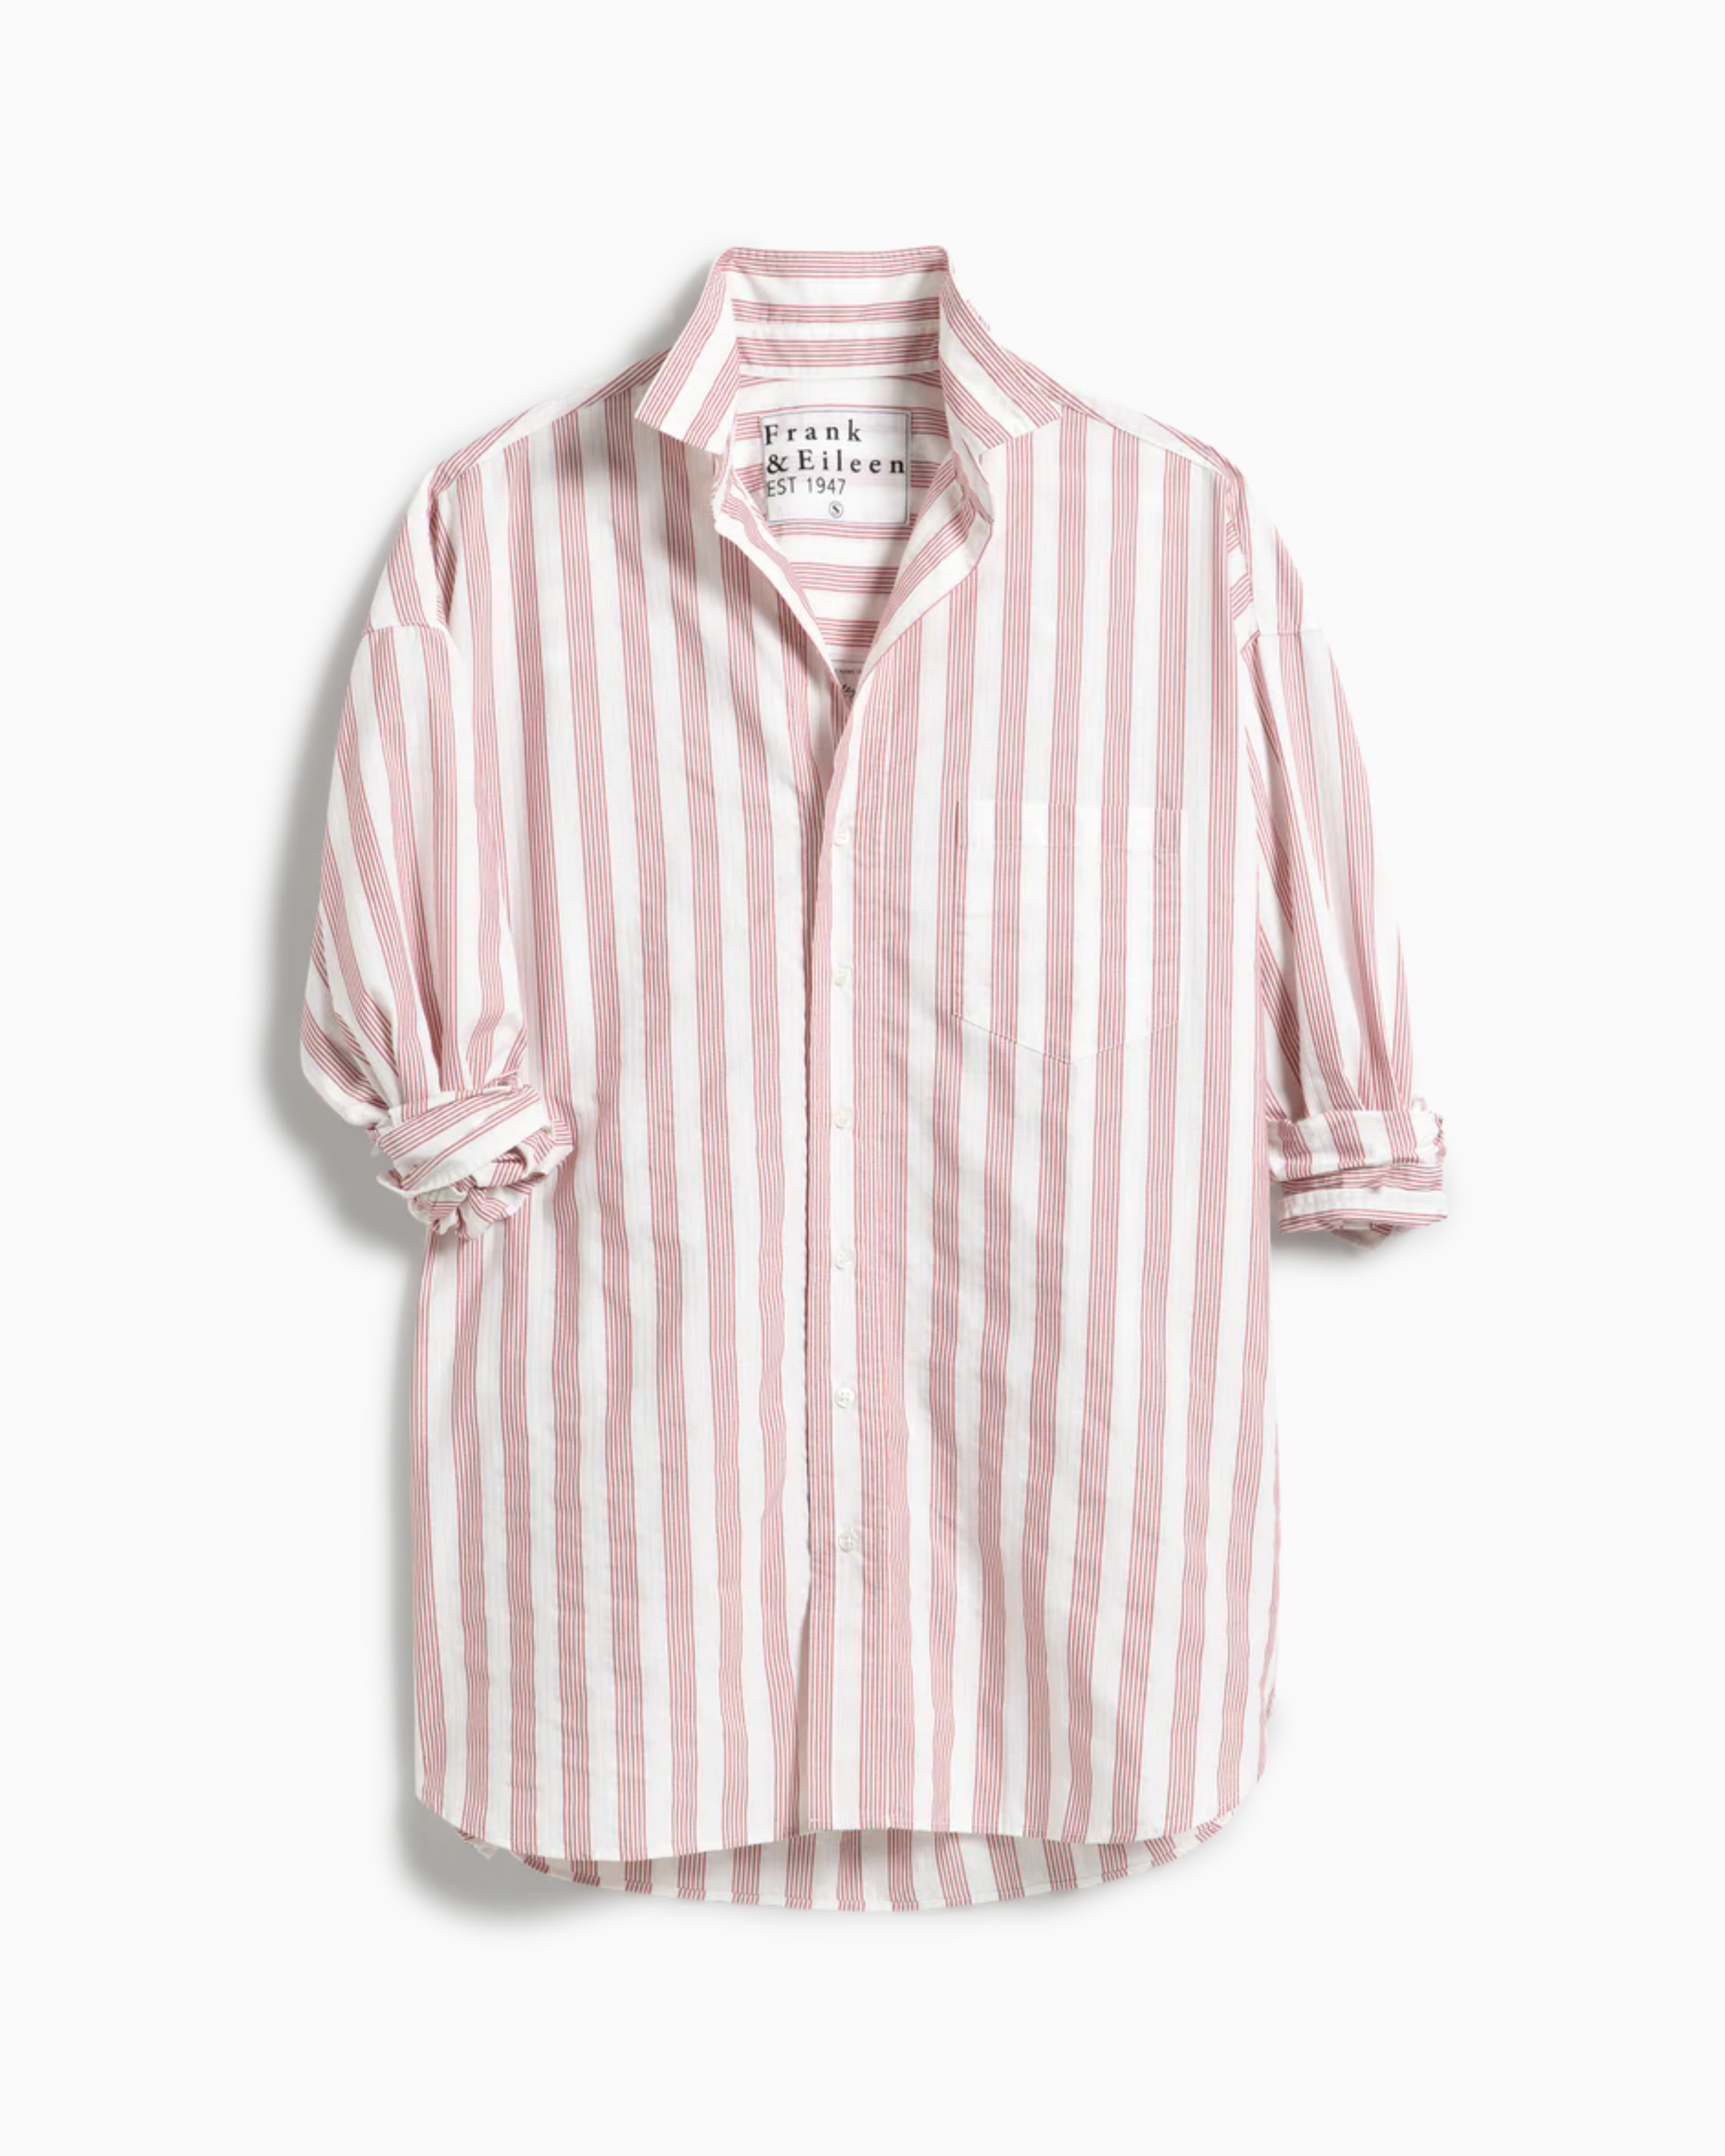 Frank & Eileen Shirley Oversized Button Up Shirt in Multi Red Stripe